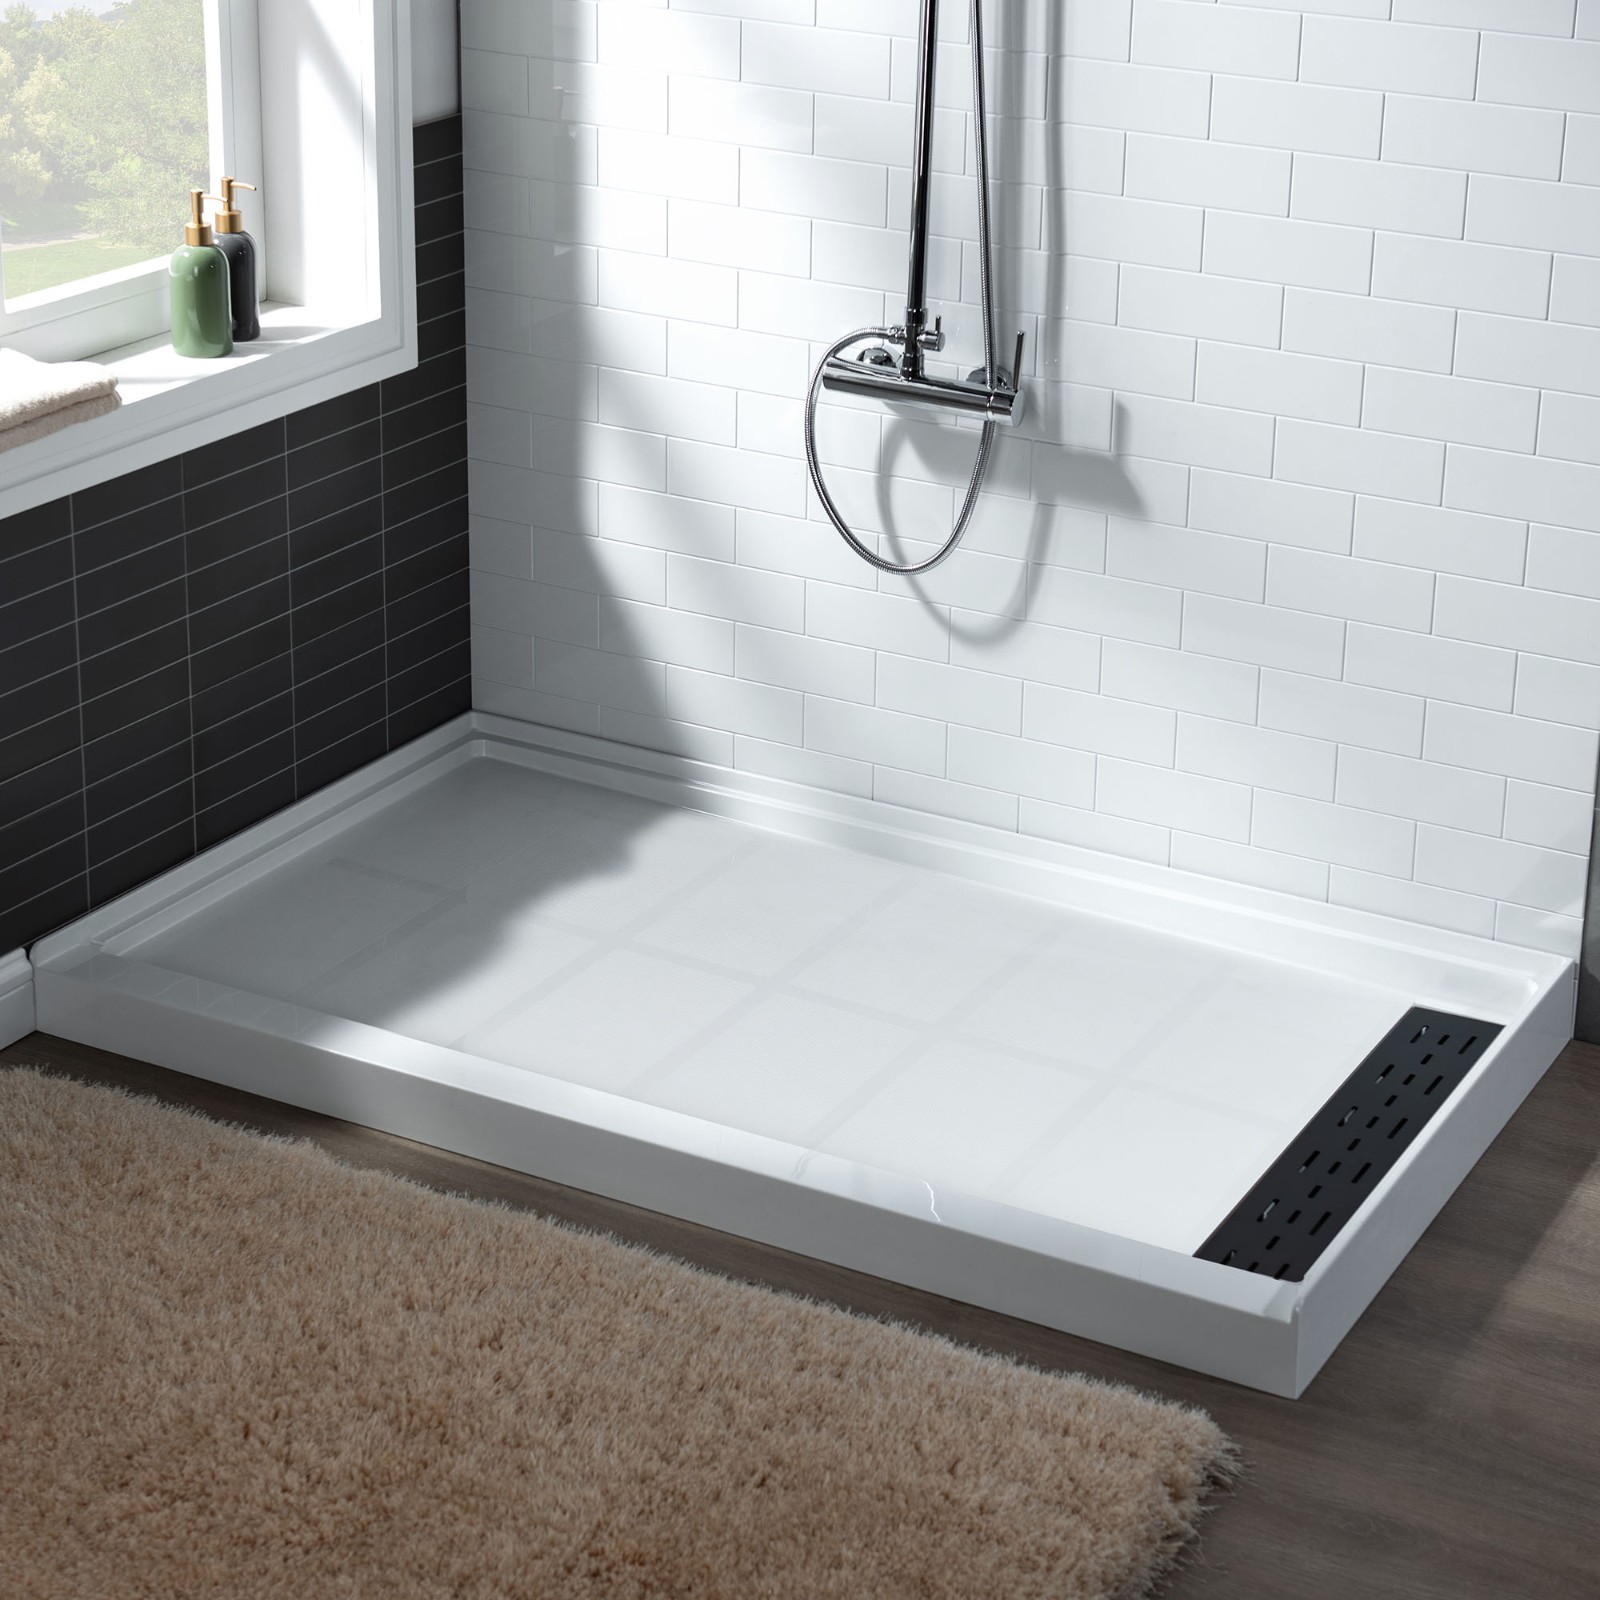  WOODBRIDGE SBR6032-1000R-MB SolidSurface Shower Base with Recessed Trench Side Including Matte Black Linear Cover, 60